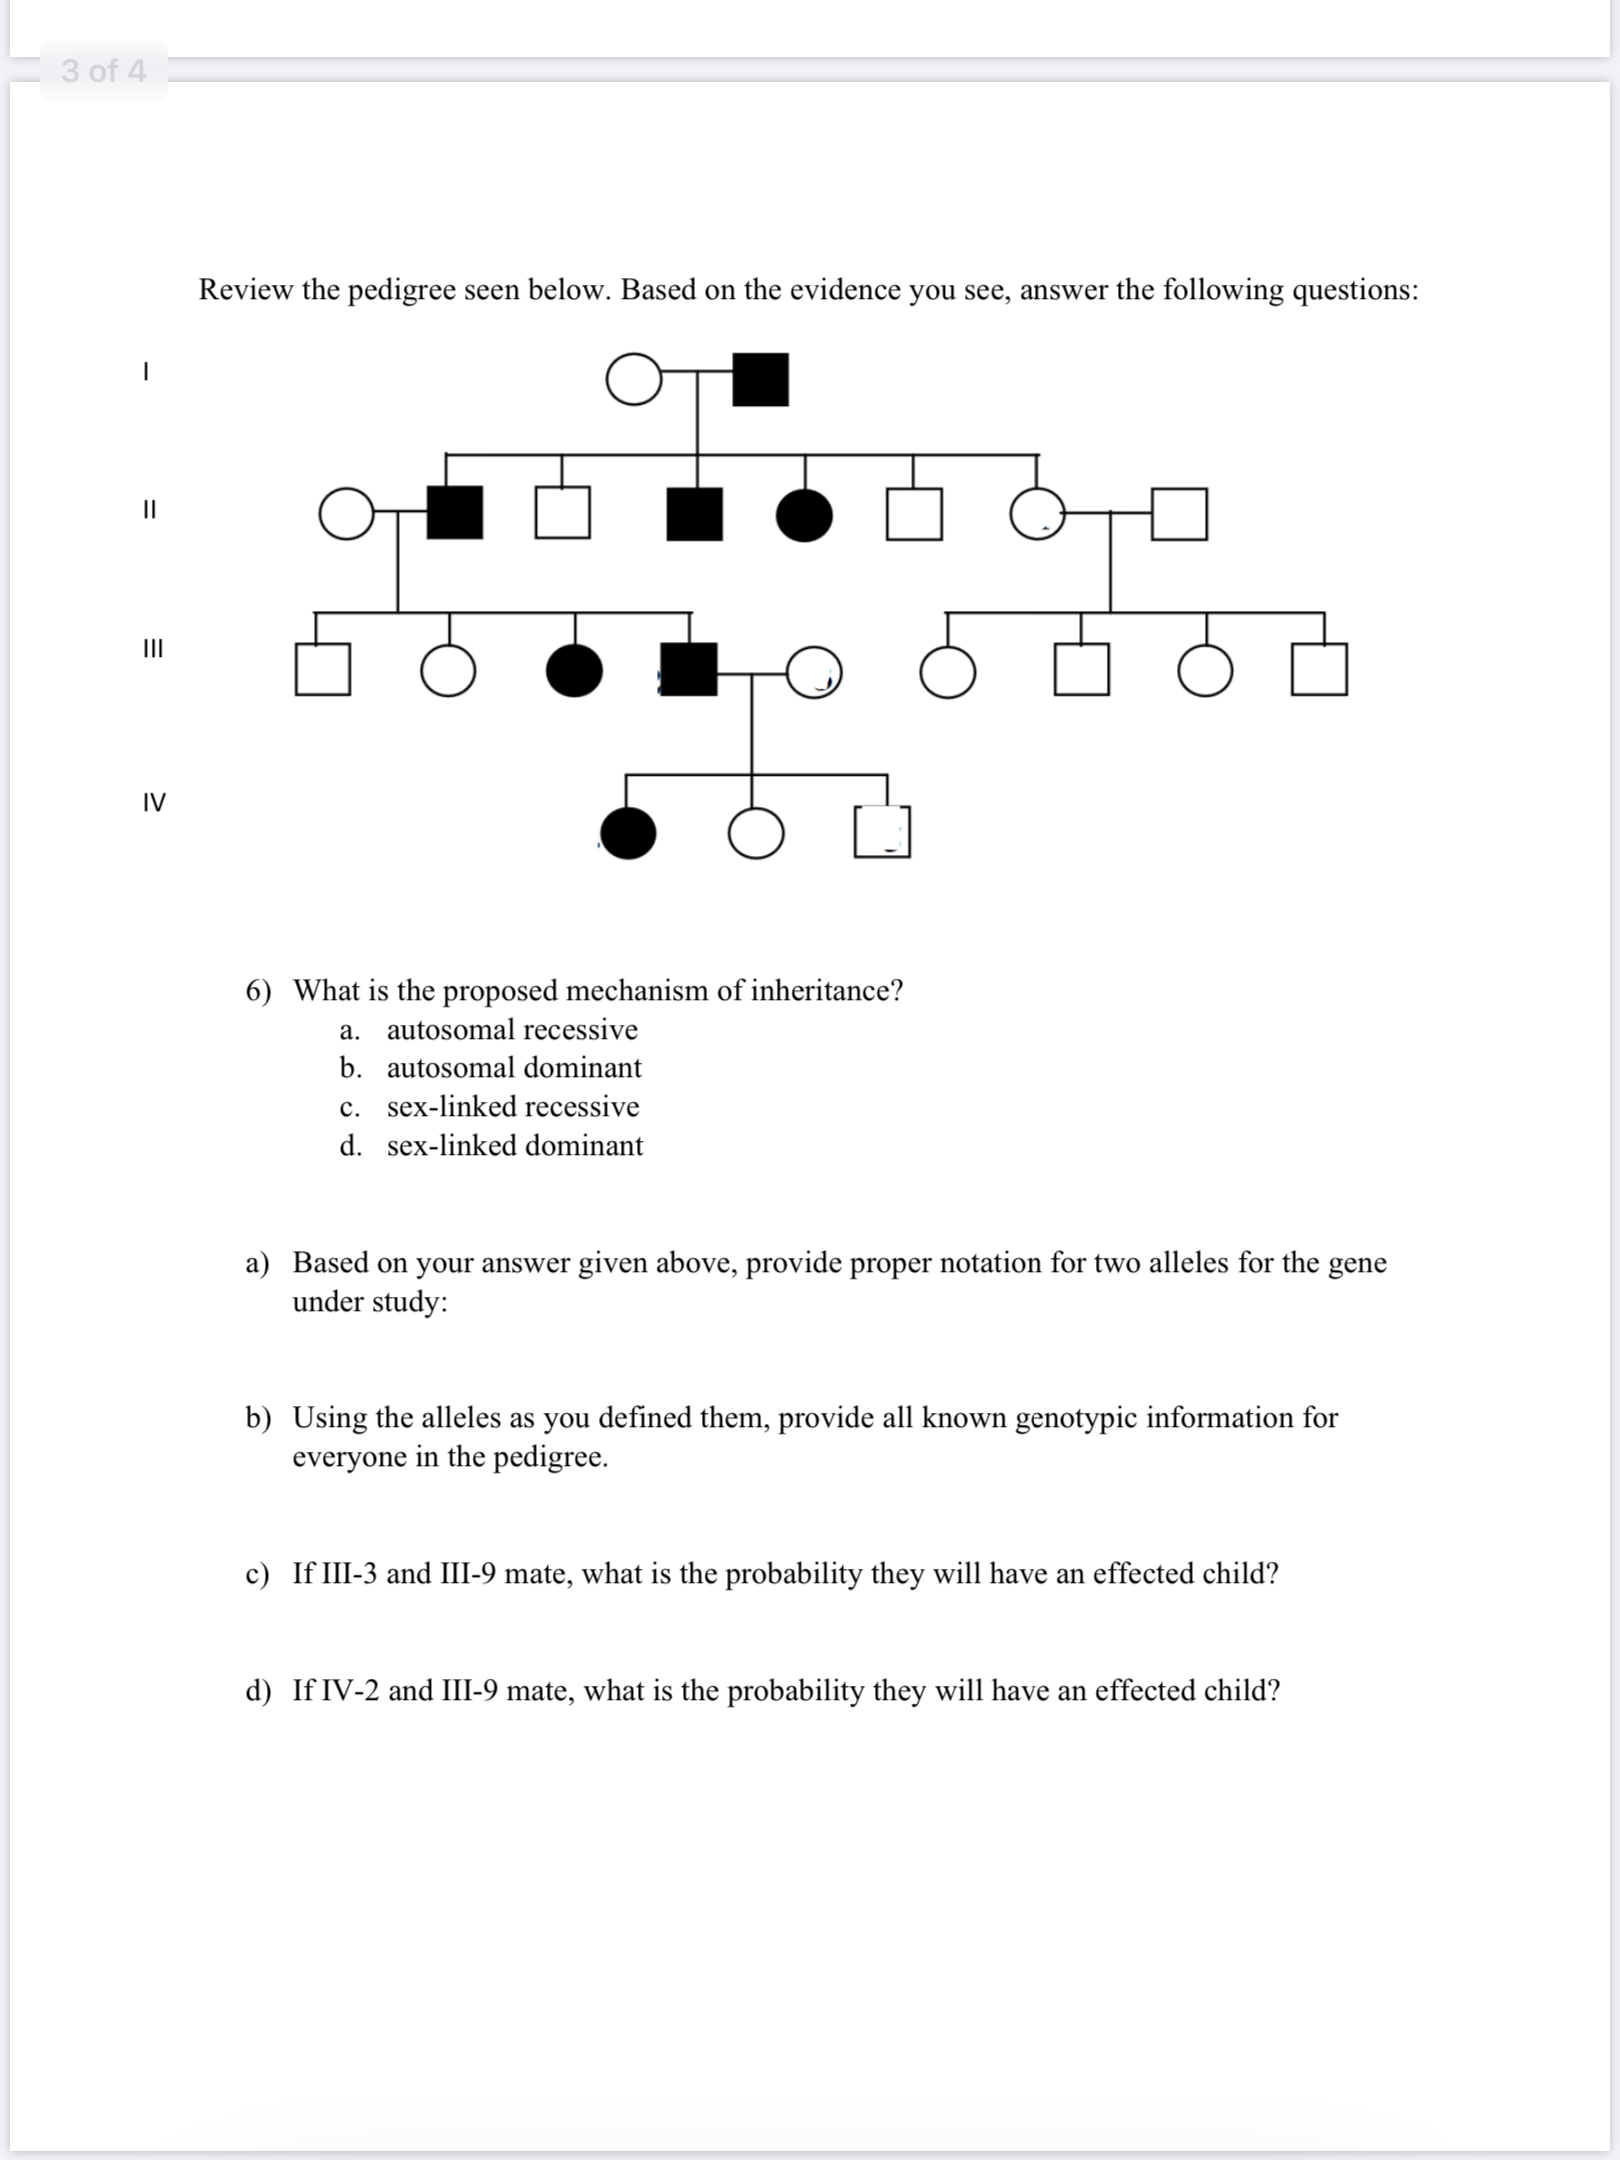 6) What is the proposed mechanism of inheritance?
a. autosomal recessive
b. autosomal dominant
c. sex-linked recessive
d. sex-linked dominant
a) Based on your answer given above, provide proper notation for two alleles for the gene
under study:
b) Using the alleles as you defined them, provide all known genotypic information for
everyone in the pedigree.
c) If III-3 and III-9 mate, what is the probability they will have an effected child?
d) If IV-2 and III-9 mate, what is the probability they will have an effected child?
